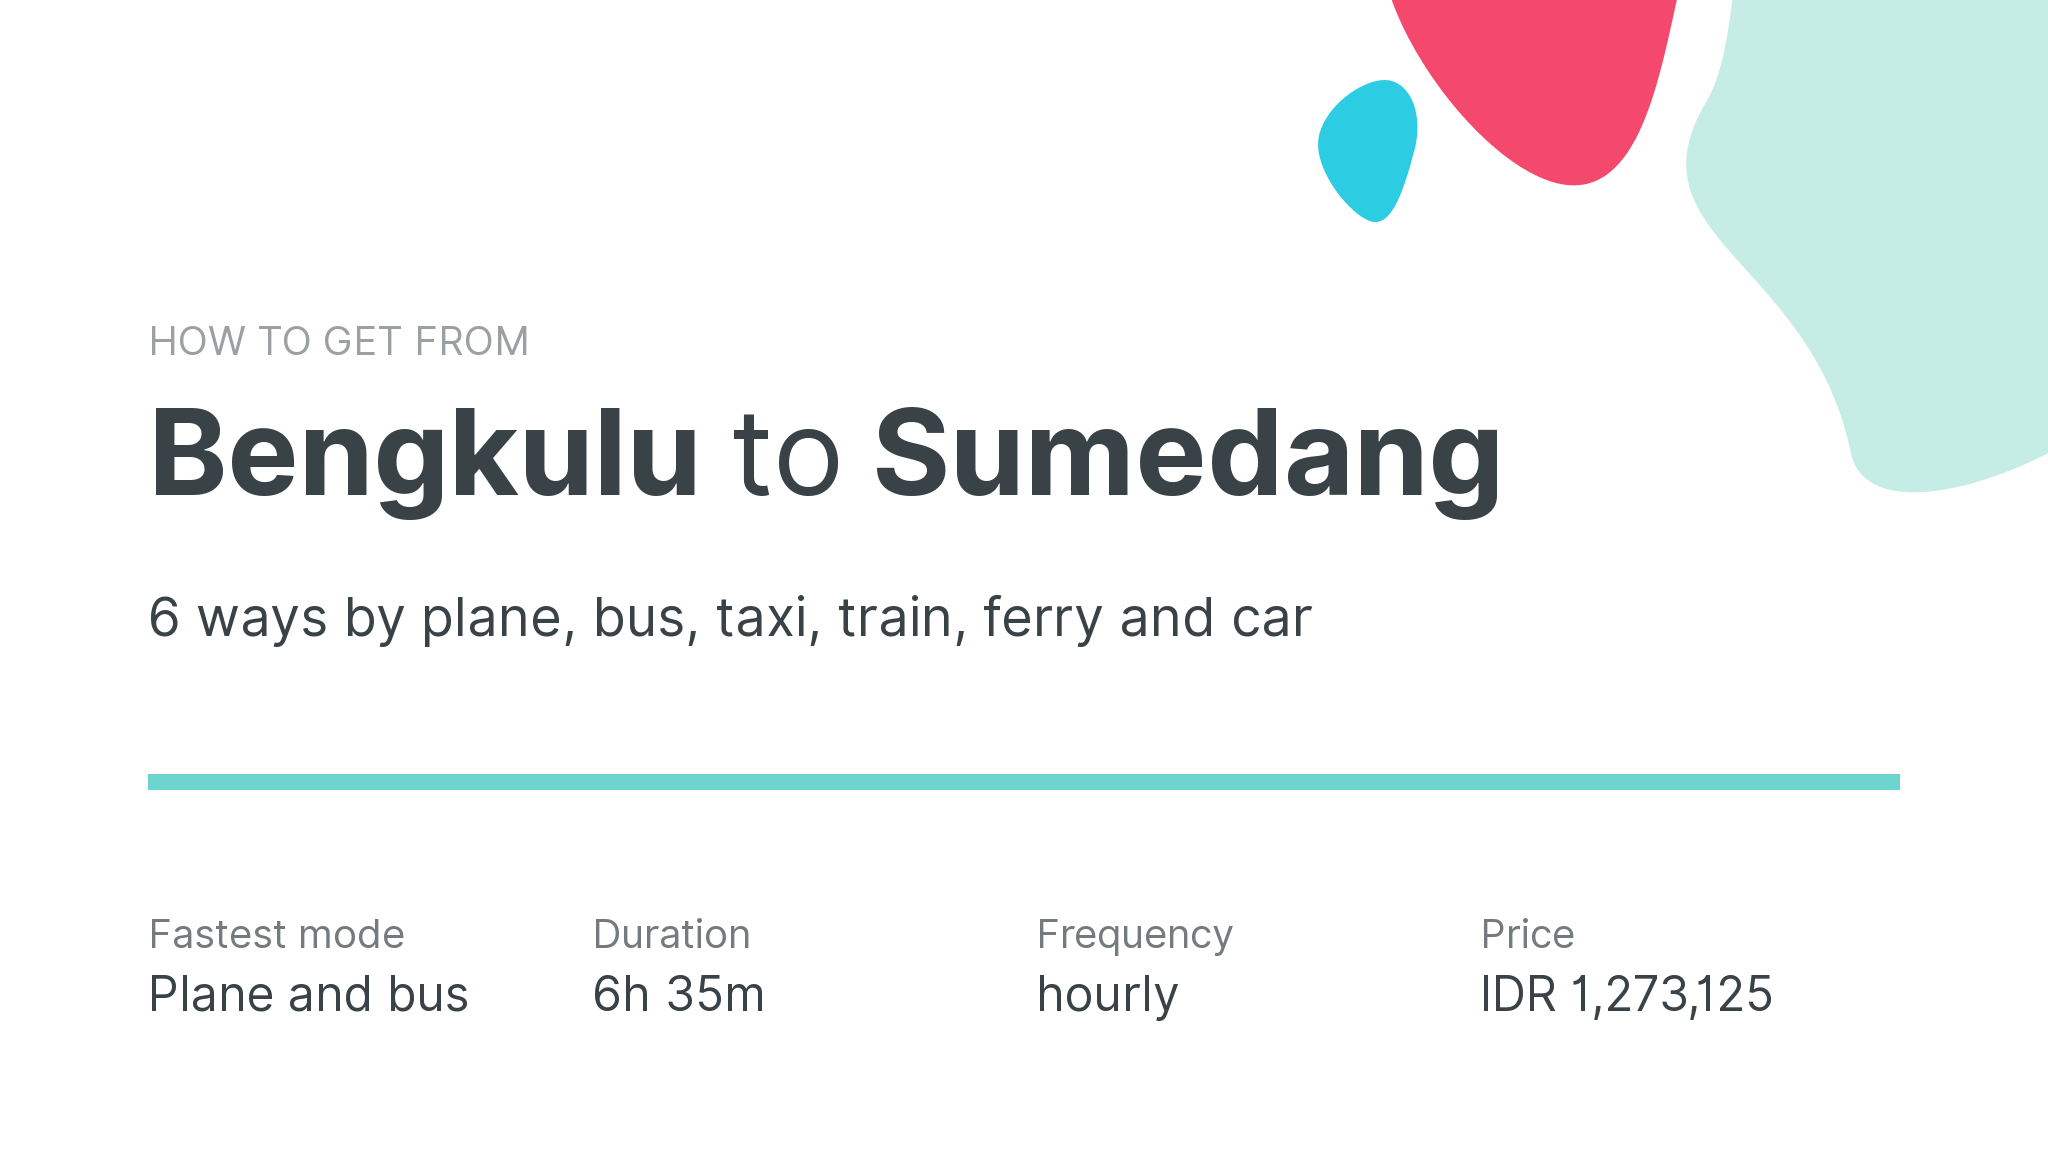 How do I get from Bengkulu to Sumedang